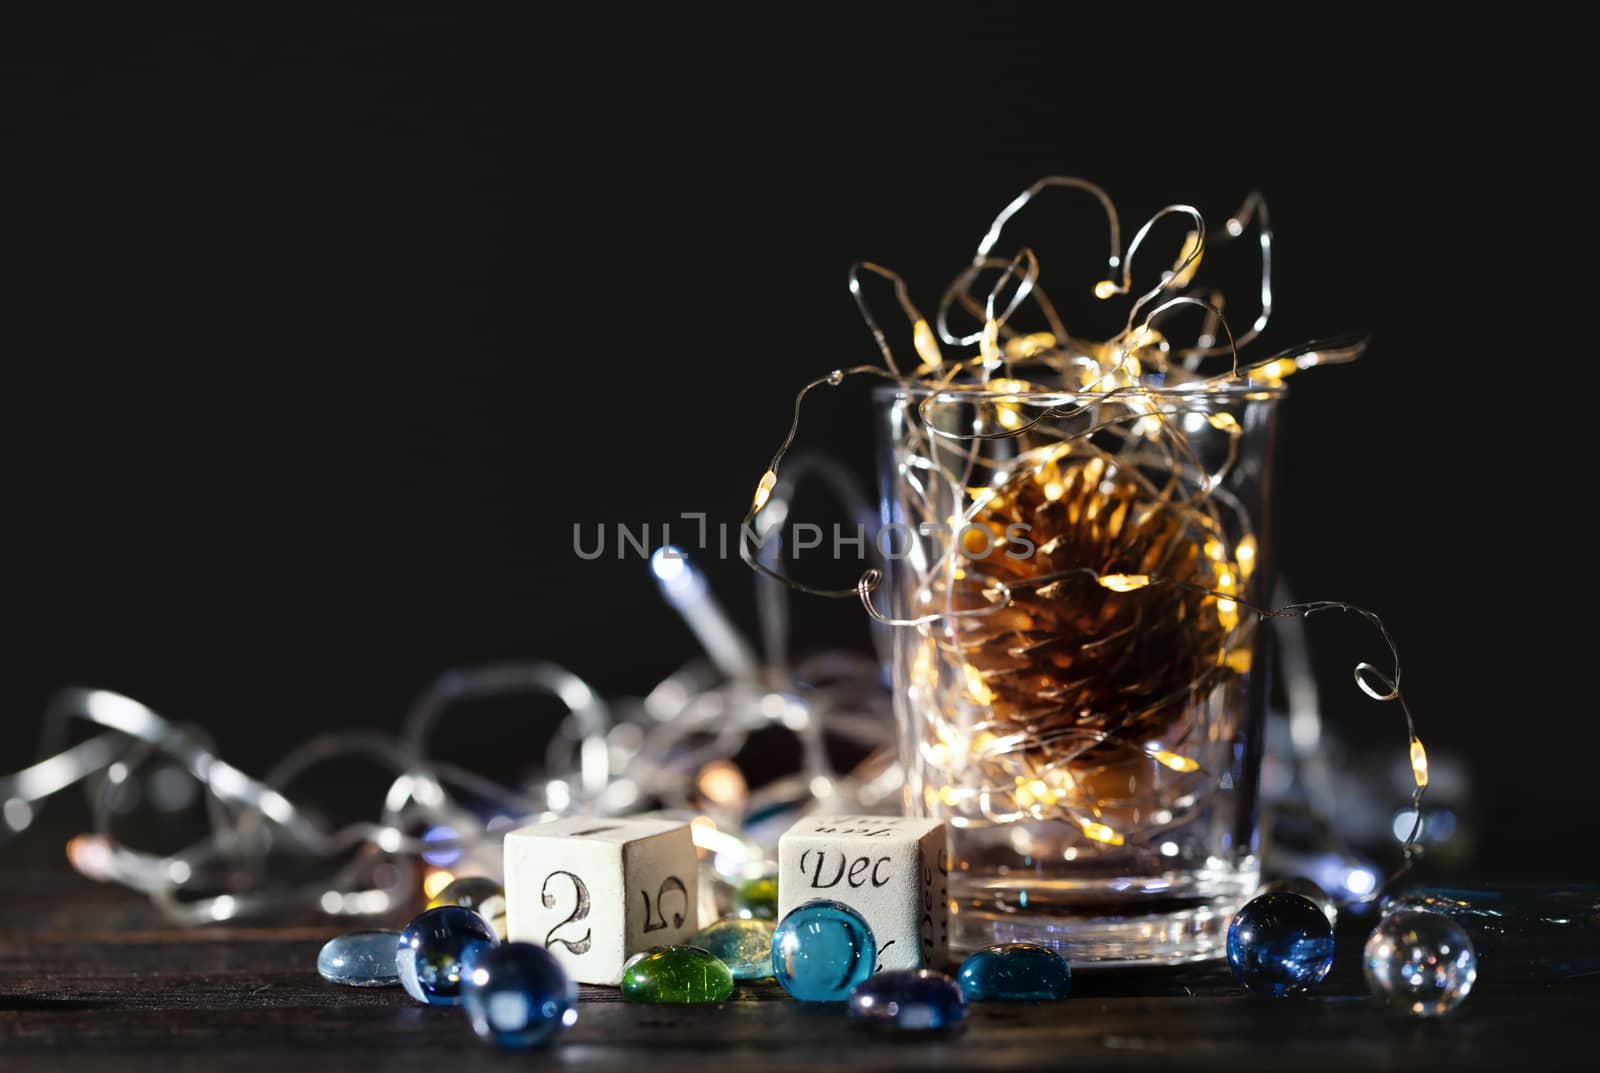 Beautiful Christmas background with  block calendar and glowing Christmas lights in a glass jar.
Calendar with the date of December 25.